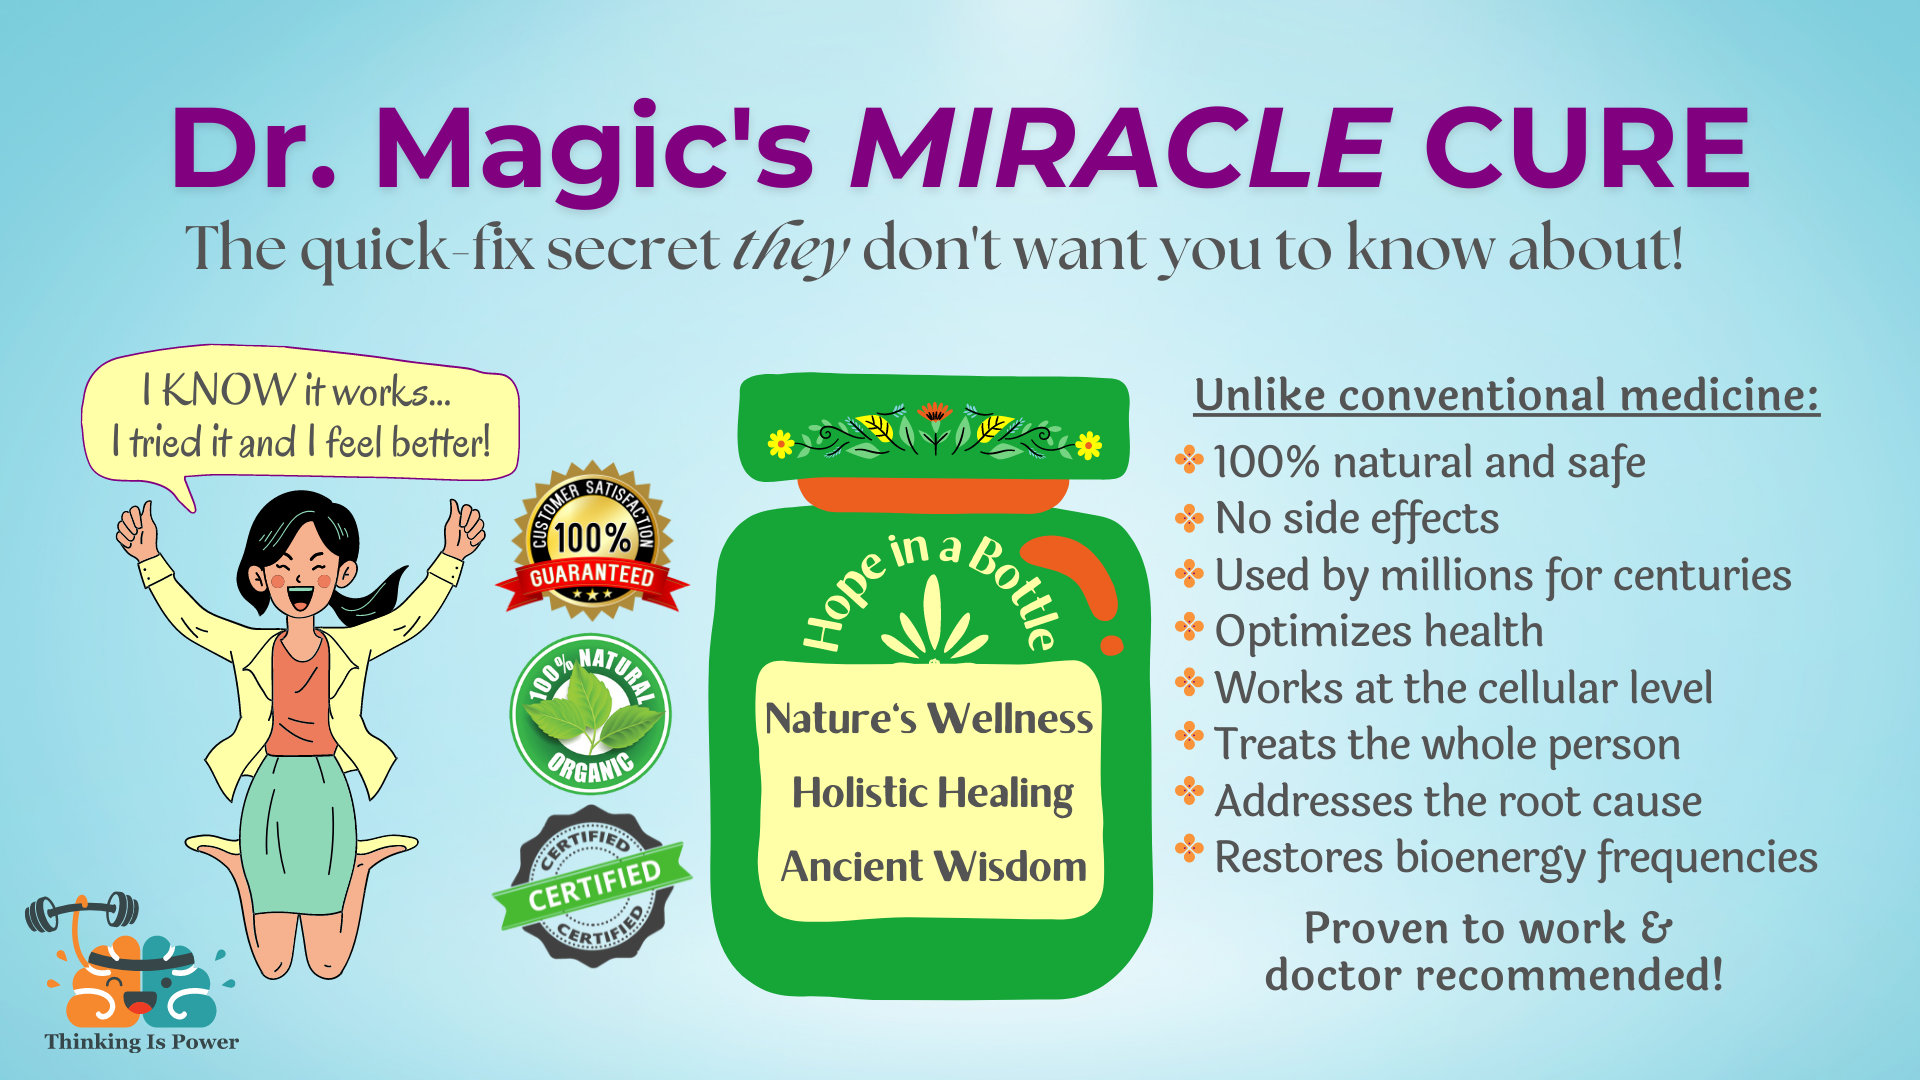 Dr. Magic's Miracle Cure, The quick-fix secret they don't want you to know about! A happy woman says, "I know it works...I tried it and I feel better!" Satisfaction guaranteed and certified. Bottle that says hope in a bottle, nature's wellness, holistic healing, and ancient wisdom. Unlike conventional medicine: 100% natural and safe, no side effects, used by millions for centuries, optimized health, works at the cellular level, treats the whole person, addresses the root cause, restores bioenergy frequencies. Proven to work and doctor recommended!